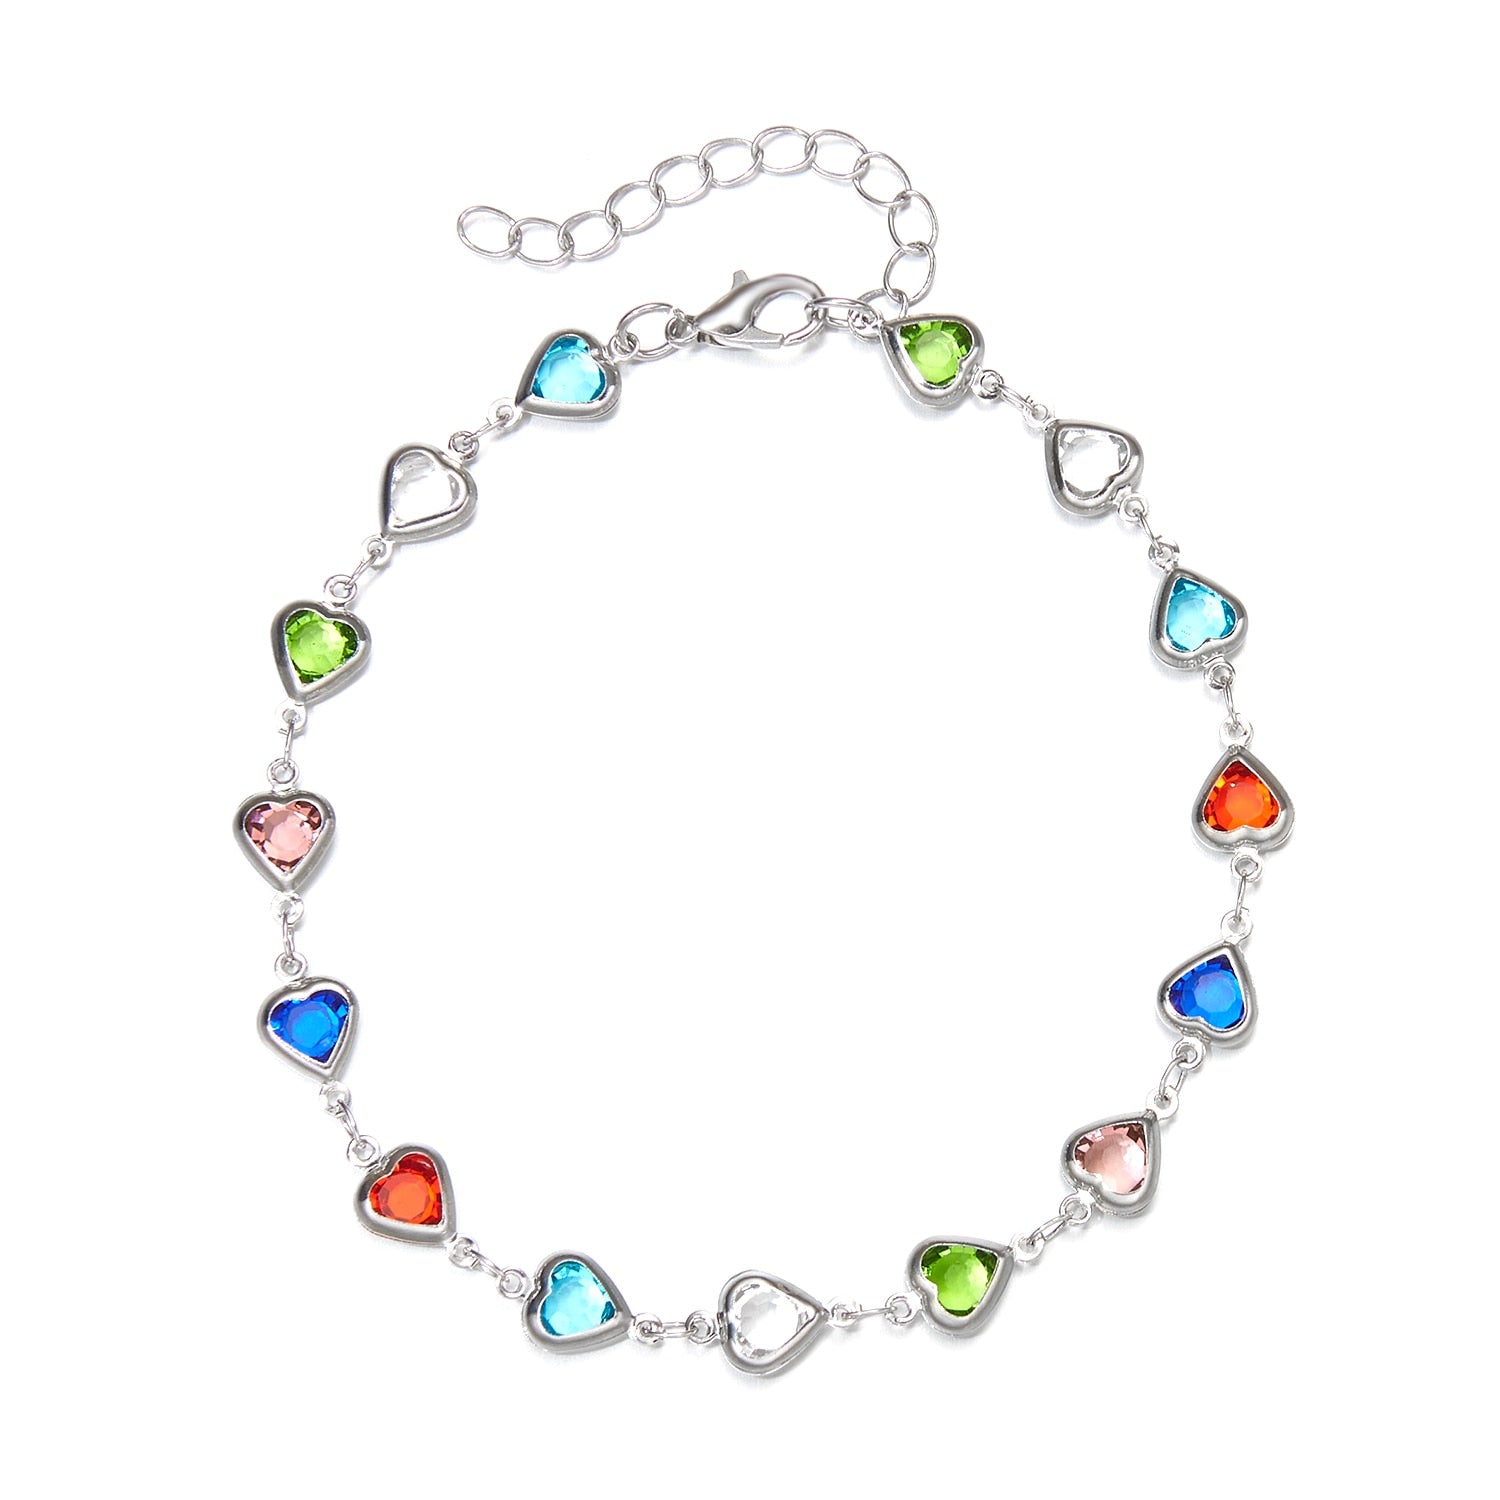 Vintage Rainbow Crystal Heart Choker Necklace for Women Gold Color Chain Boho Jewelry Statement Summer Beach Gift Collar - Charlie Dolly